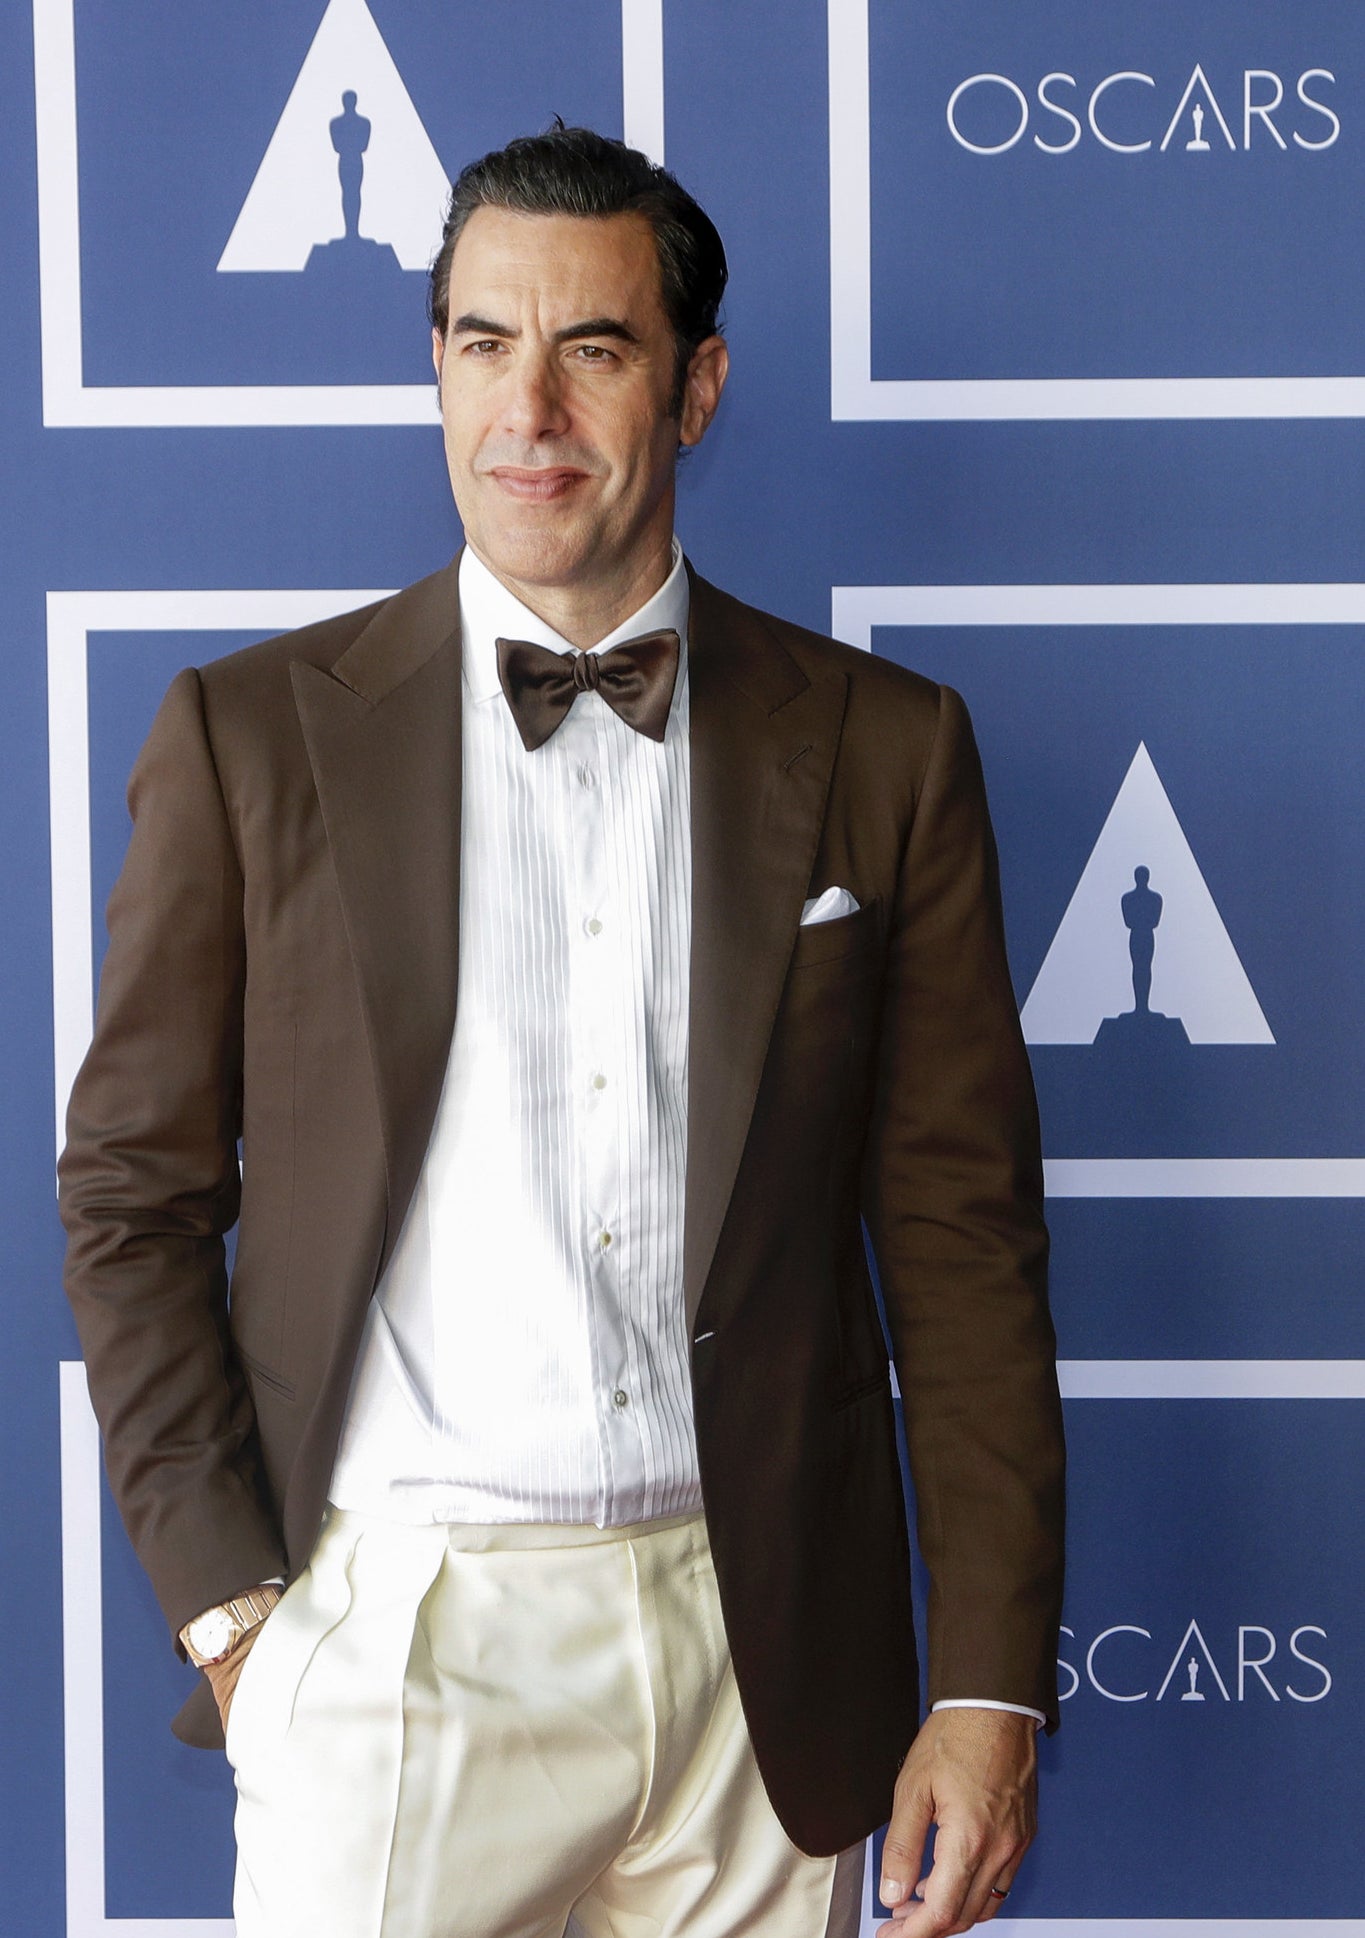 Sacha Baron Cohen attends a screening of the Oscars